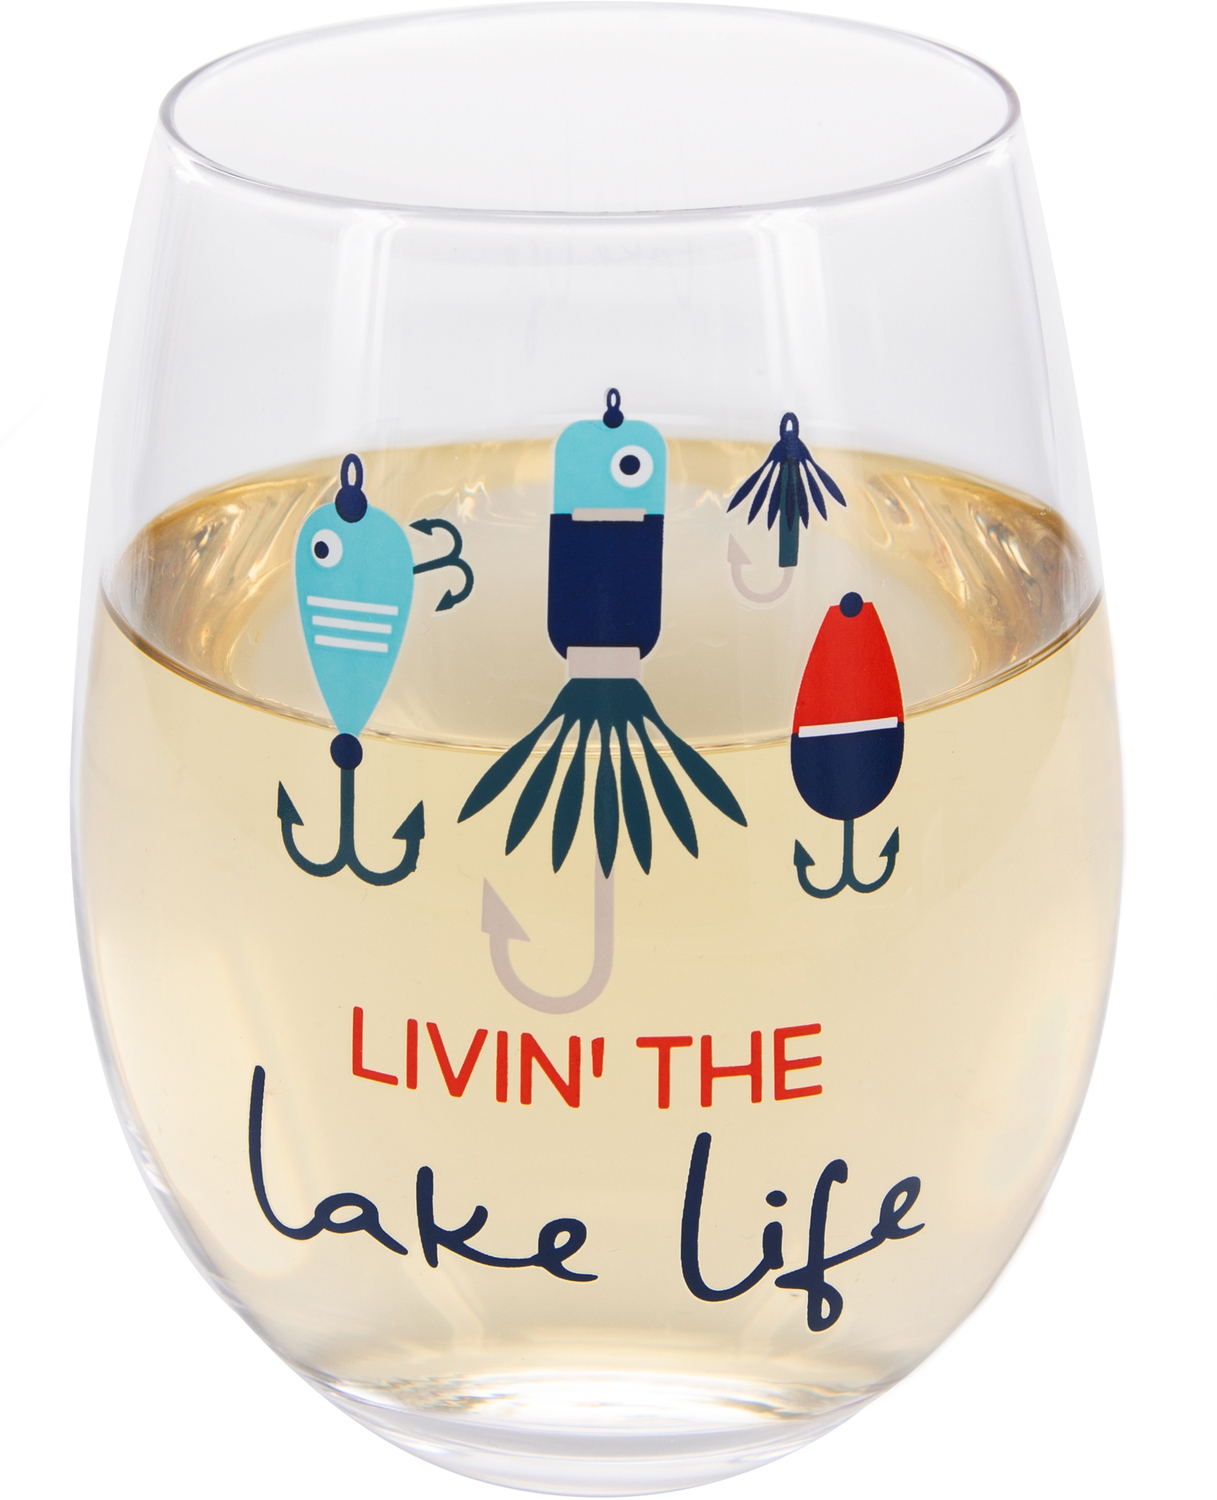 Livin' the Lake Life by We People - Livin' the Lake Life - 18 oz Stemless Wine Glass